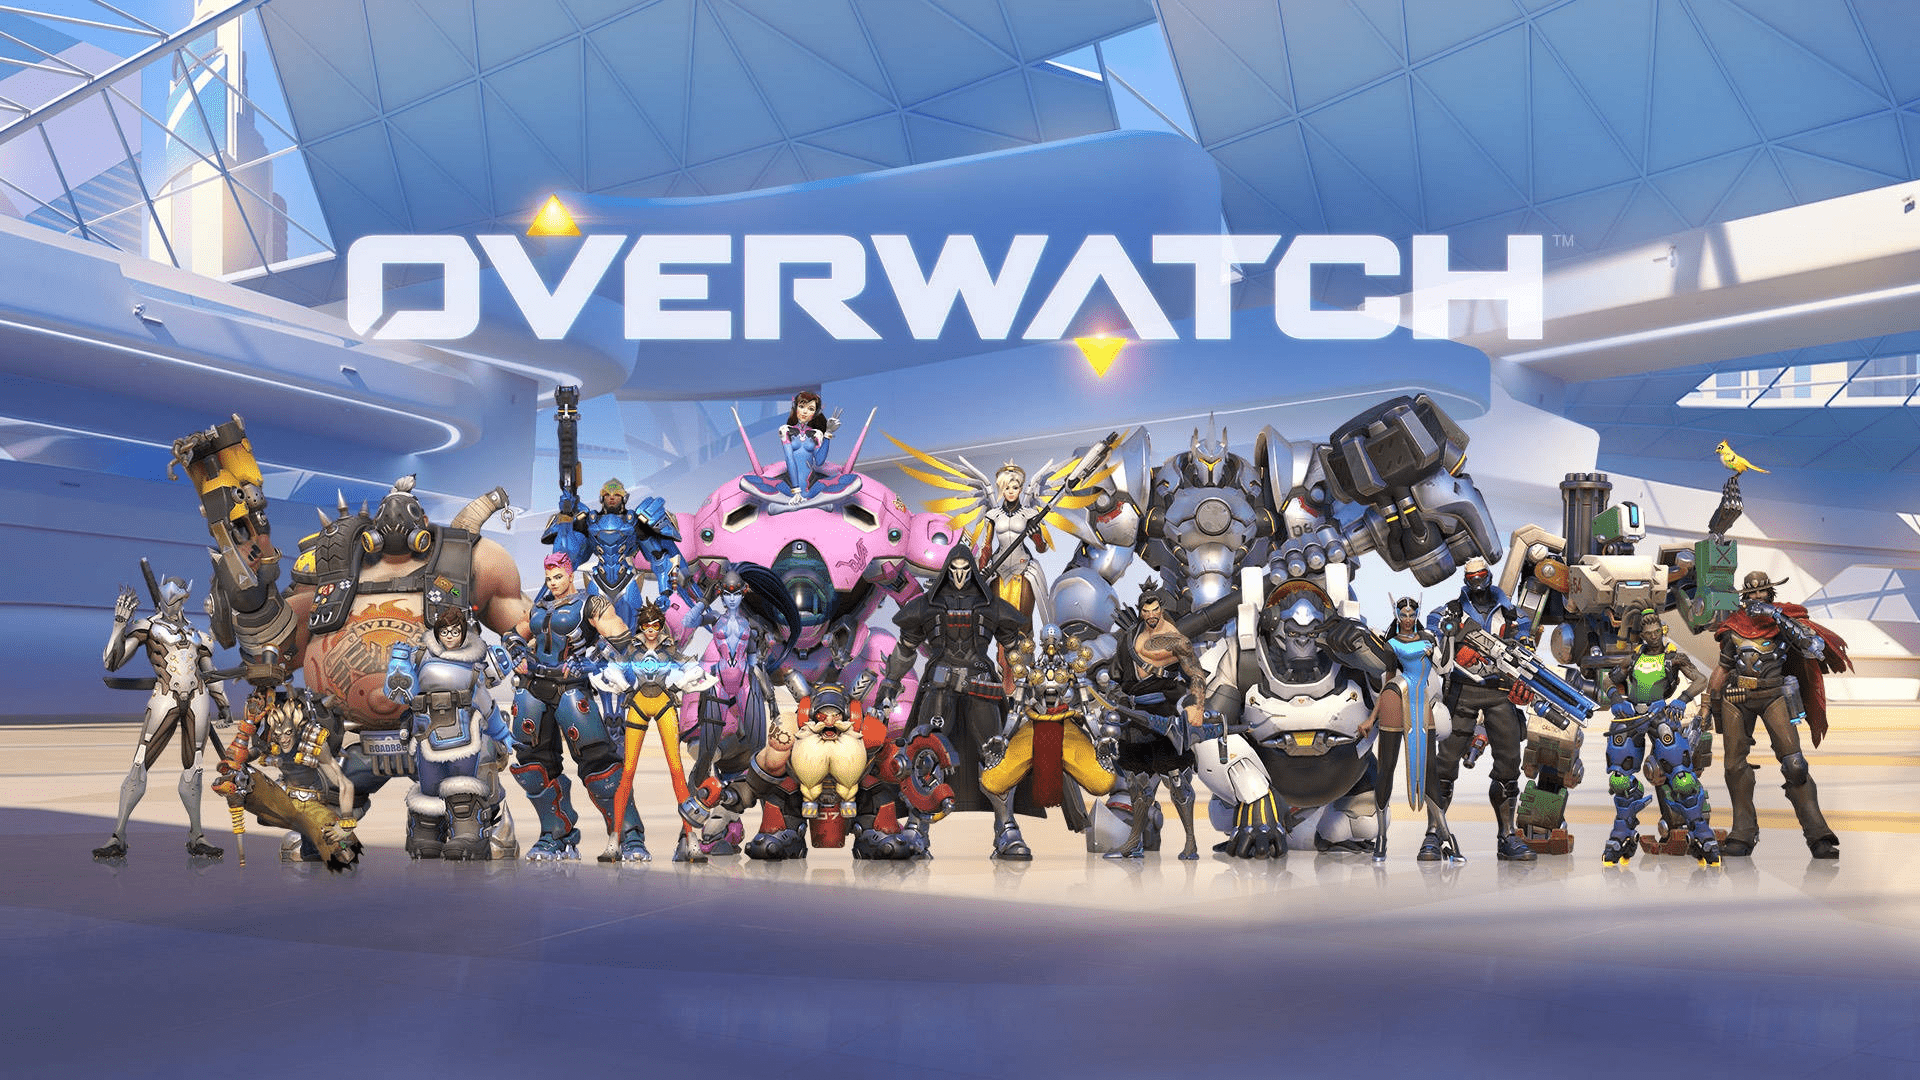 Overwatch wallpaper where all the overwatch characters stand in front of the logo